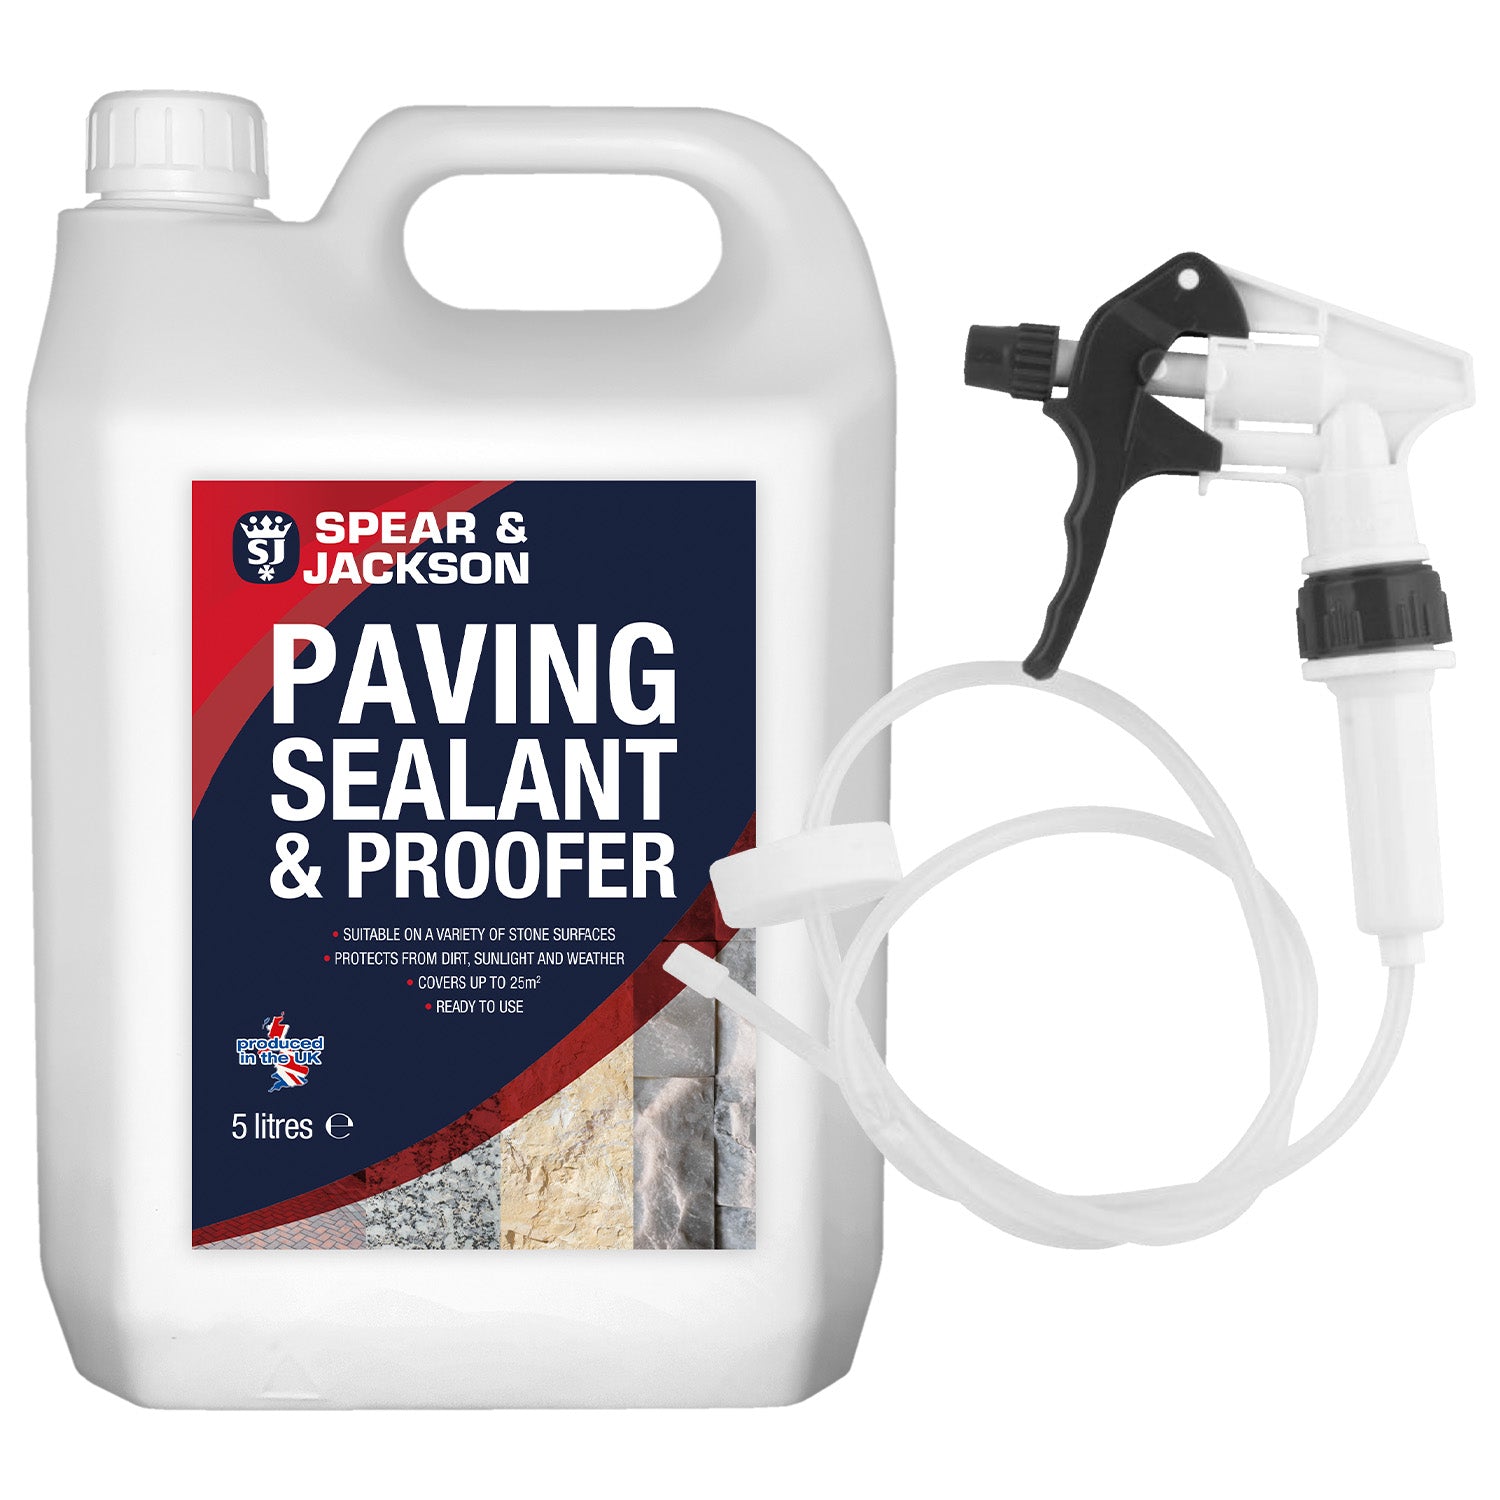 Spear & Jackson - Paving Sealant and Proofer 5L Water Seal with Long Hose Trigger